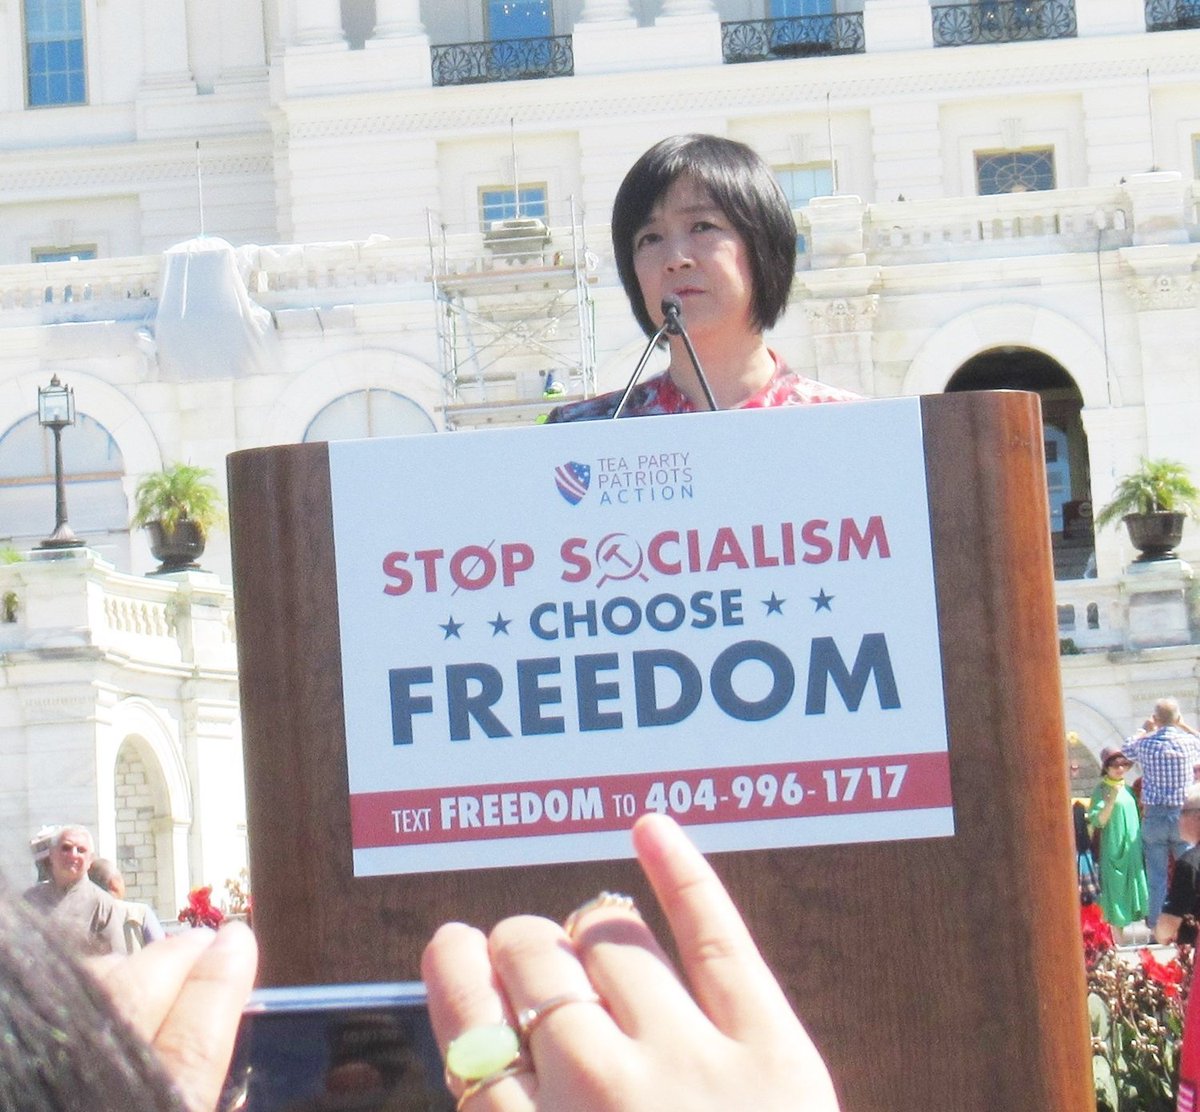 .In addition to seeking the overthrow of the Chinese government, Falun Gong and Zeng work with American far-right forces like the Tea Party Patriots to oppose rising progressive and socialist movement in the US. Here is Zeng speaking at a Sept 2019 rally organized by TPP in DC: